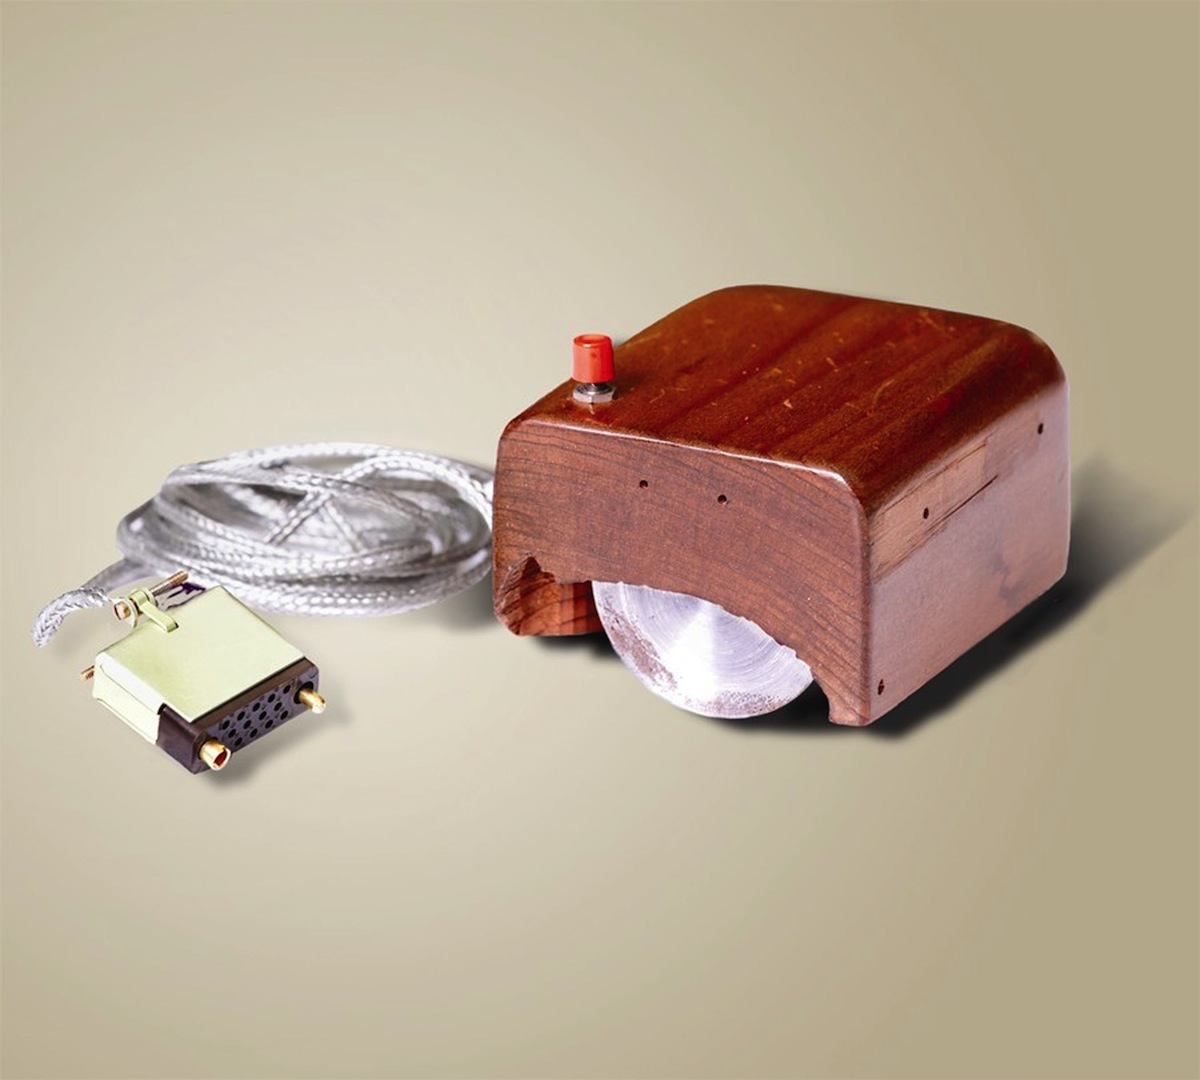 A prototype of the first mouse, from 1968 (Rue des Archives / APIC / Getty Images)